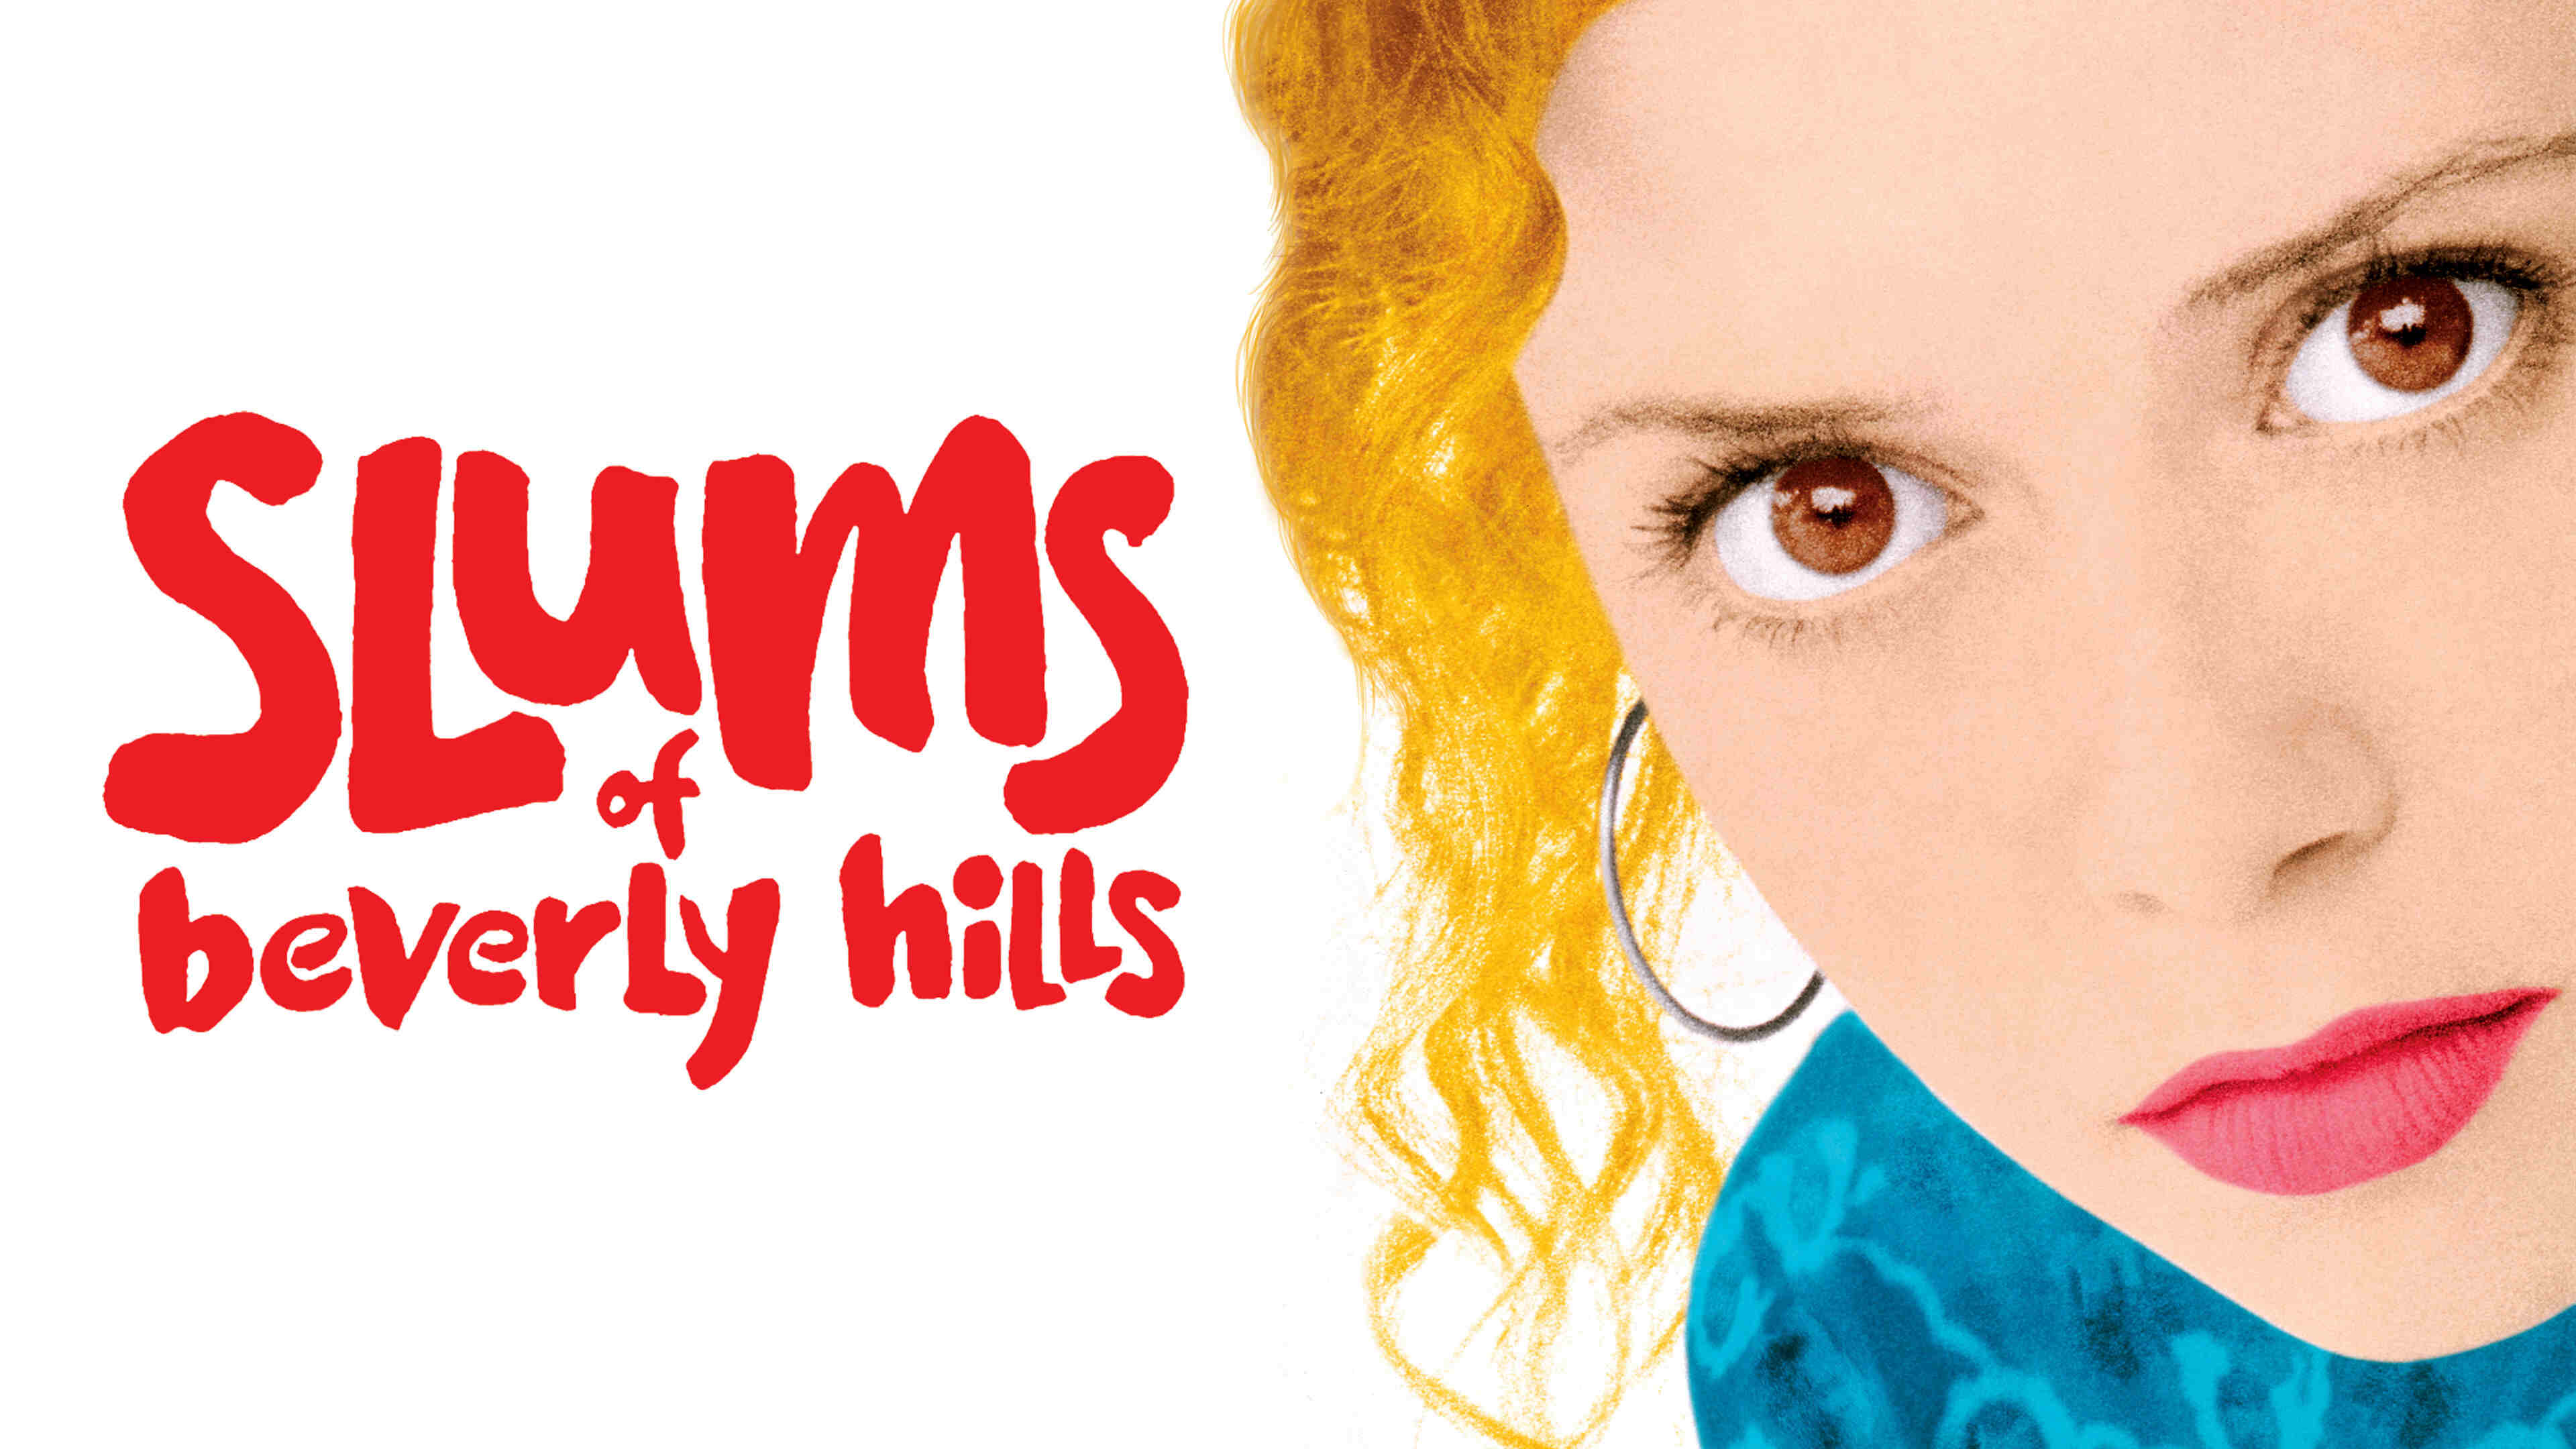 38-facts-about-the-movie-slums-of-beverly-hills